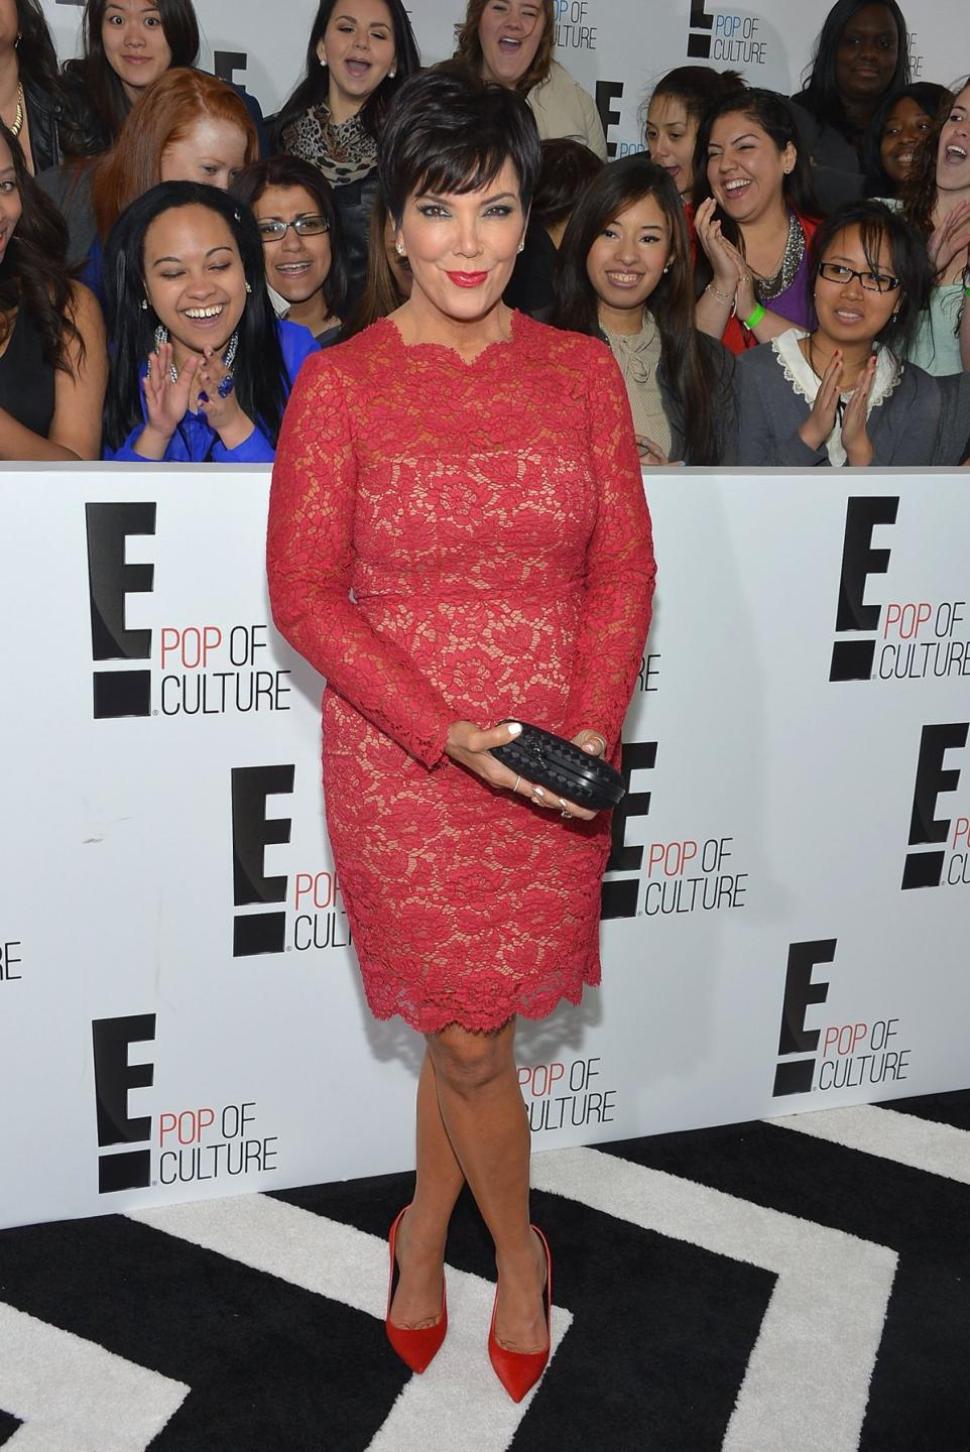 NEW YORK, NY - APRIL 22: Television personality Kris Jenner attends the E! 2013 Upfront at The Grand Ballroom at Manhattan Center on April 22, 2013 in New York City. (Photo by Mike Coppola/Getty Images)